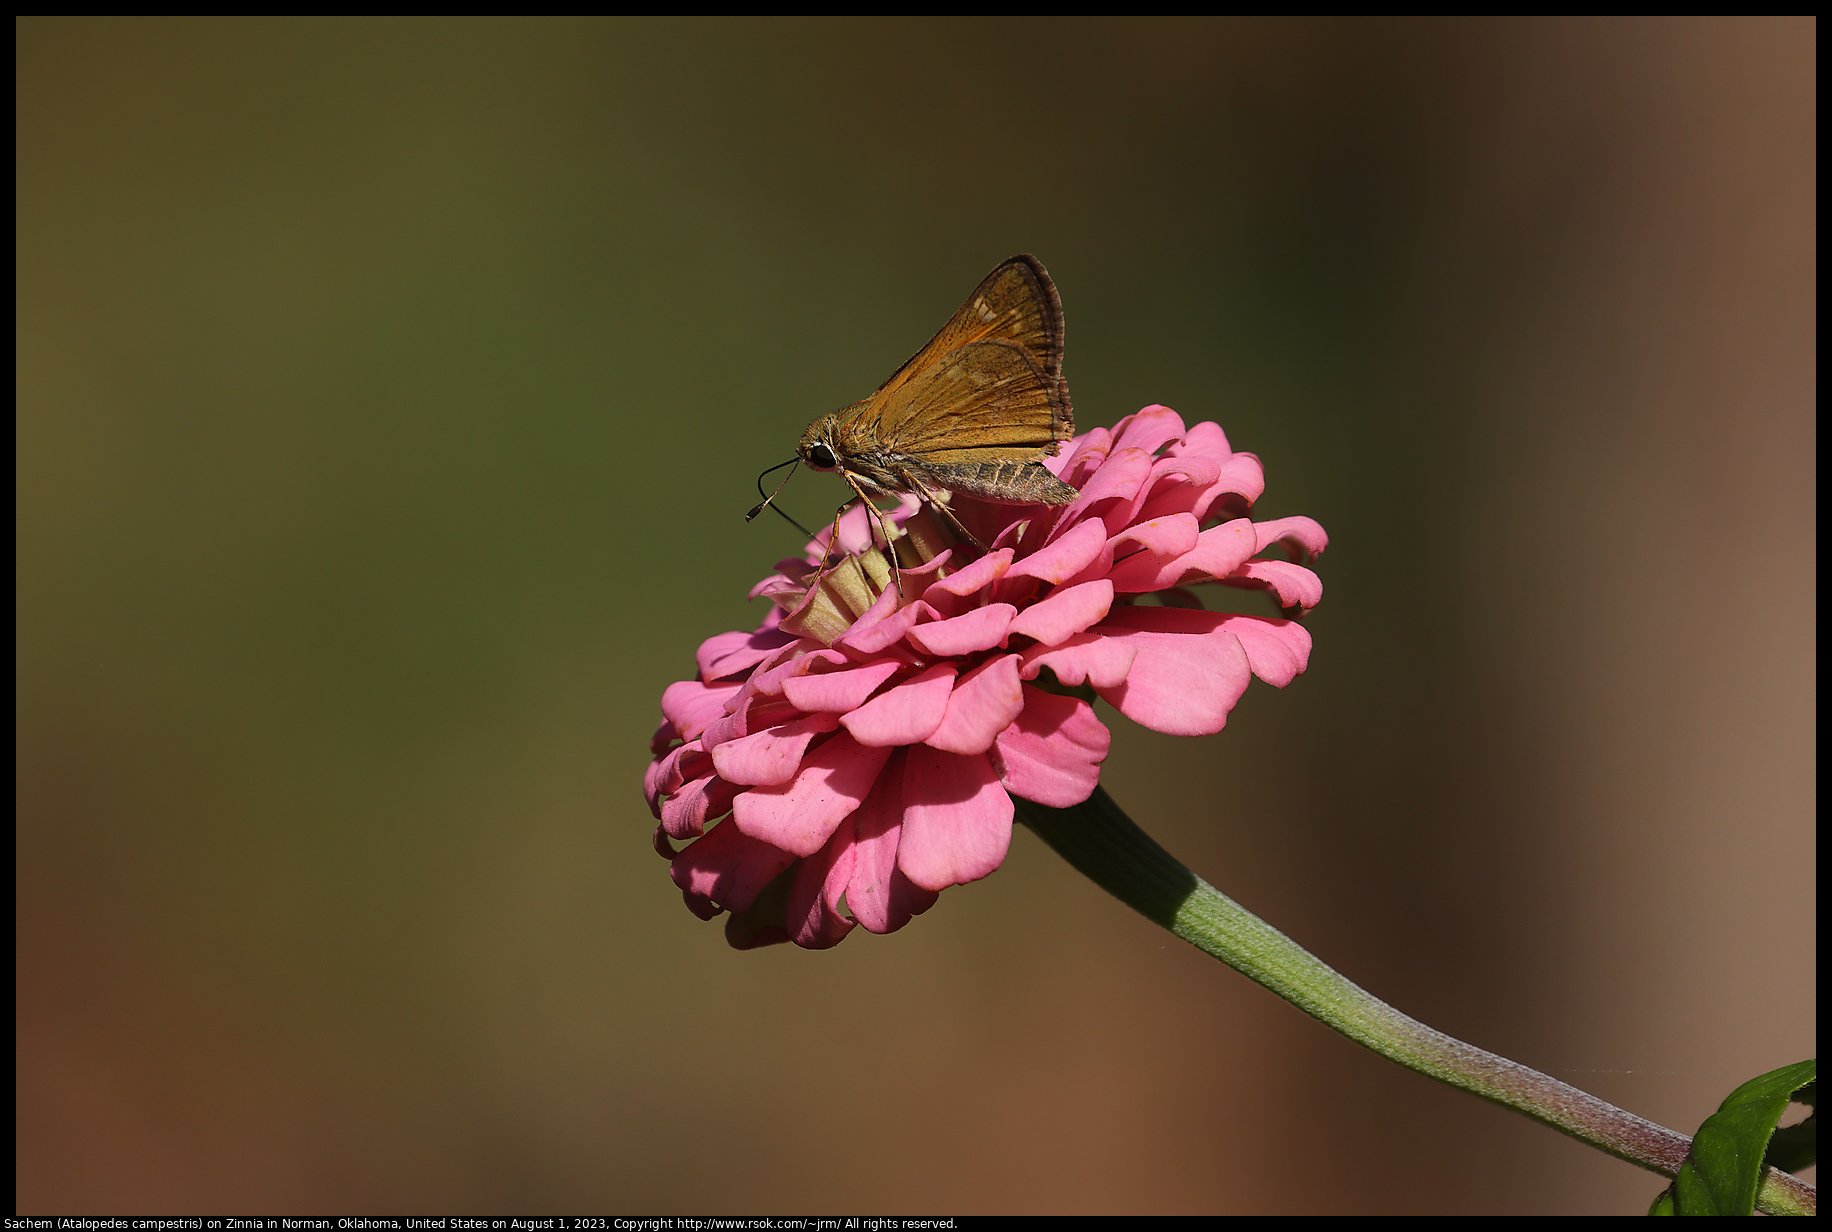 Sachem (Atalopedes campestris) on Zinnia in Norman, Oklahoma, United States on August 1, 2023